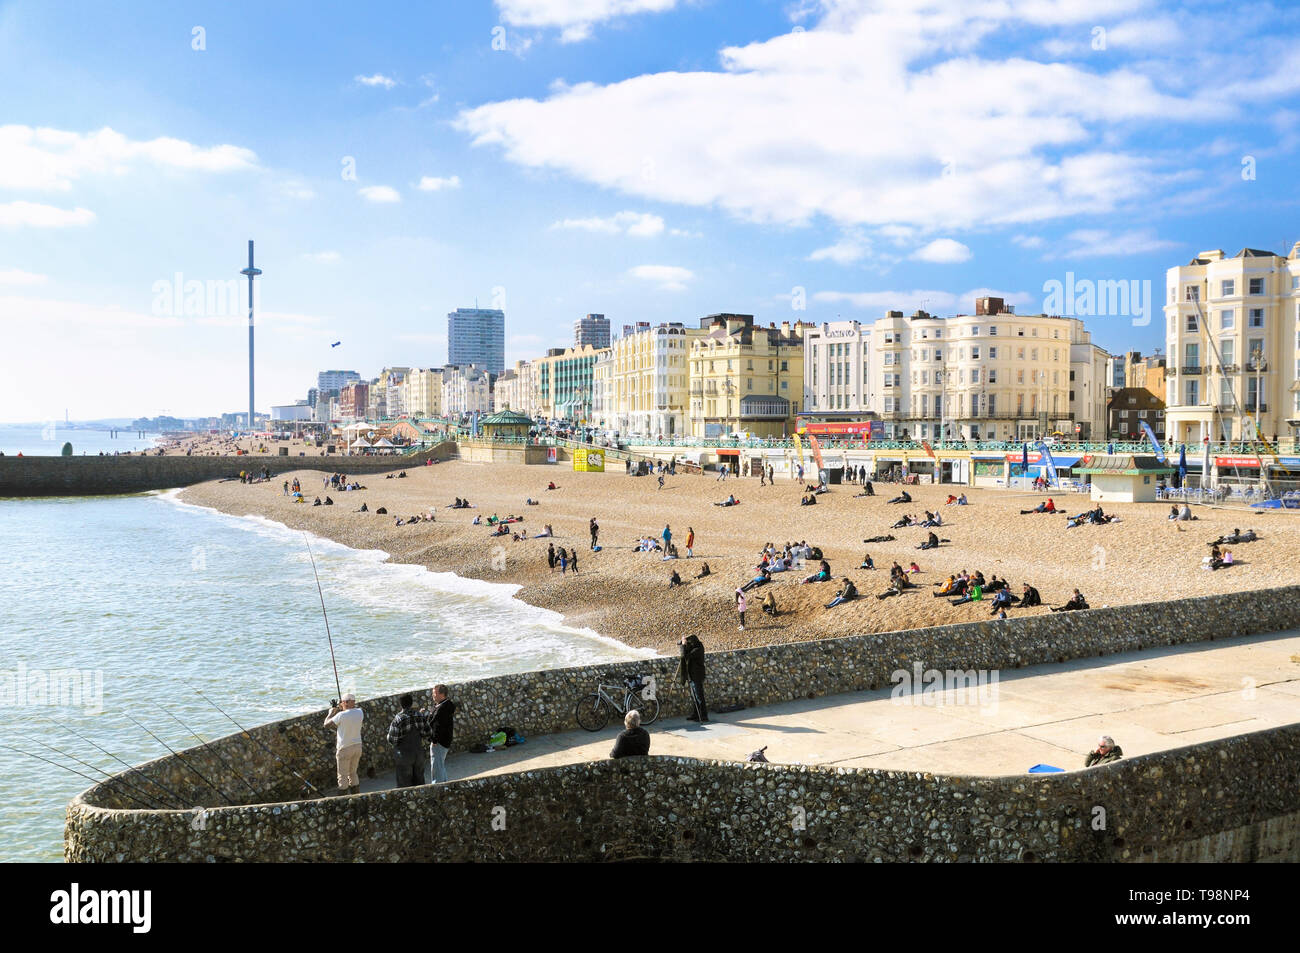 A view of Brighton beach and seafront hotels on the promenade as seen from Palace Pier, Brighton and Hove, East Sussex, England, UK Stock Photo